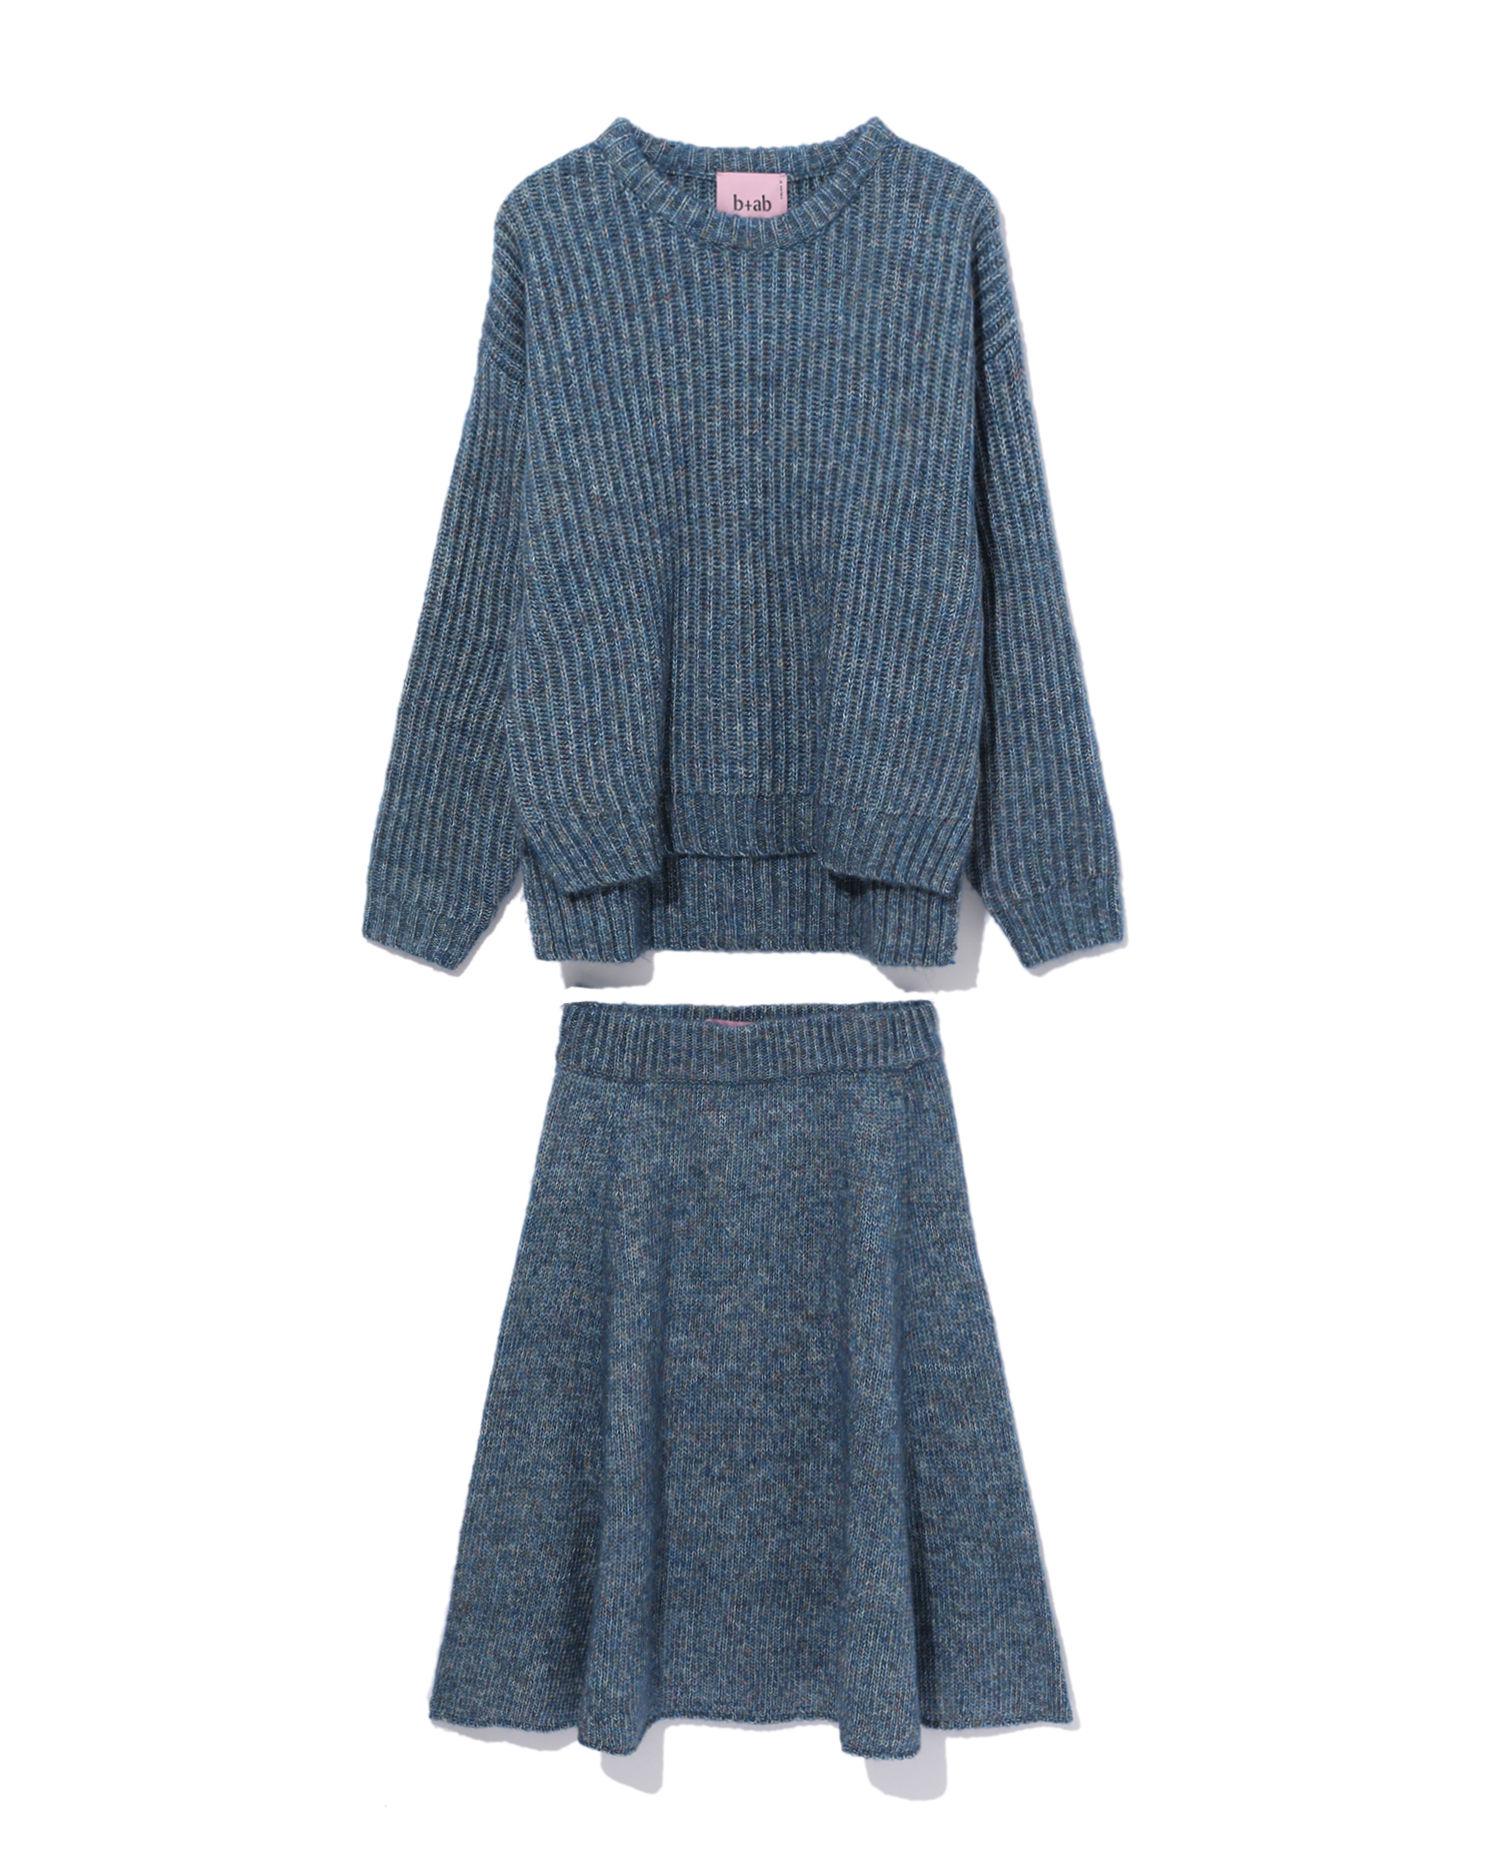 Knit sweater and skirt set by B+AB